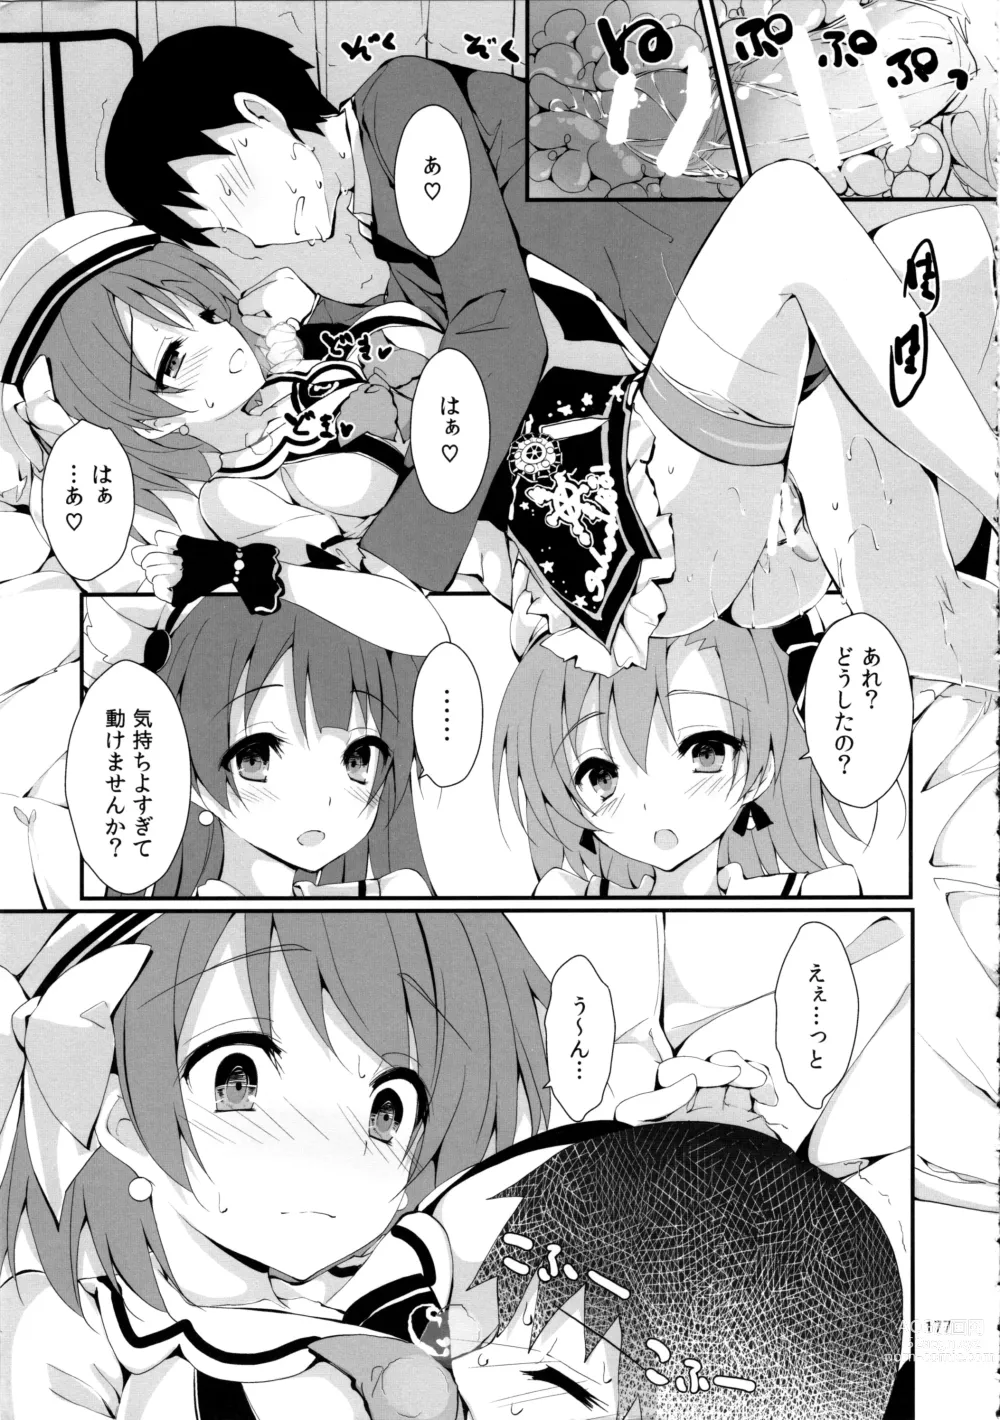 Page 180 of doujinshi Elo Live! collection IV